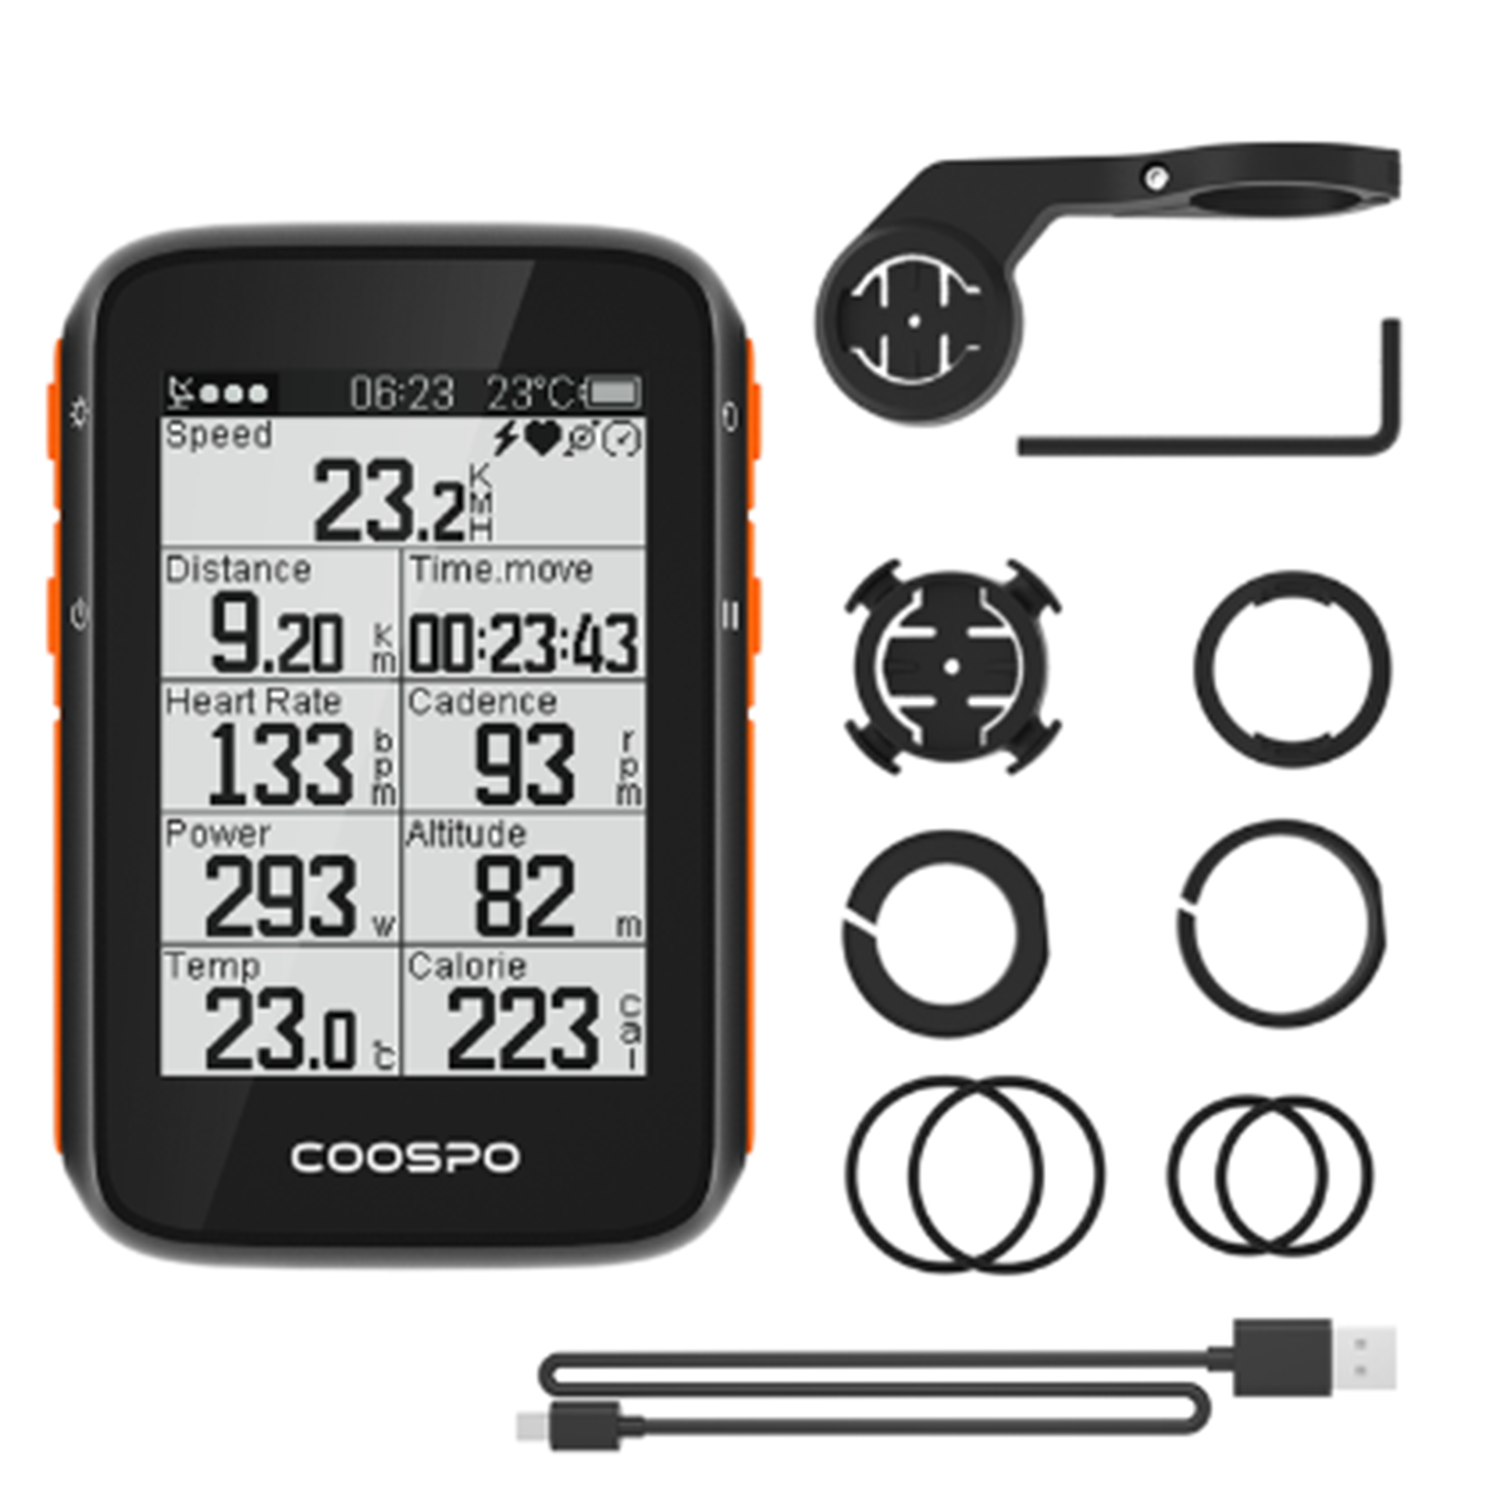 Coospo BC200 Wireless Bike Computer 2.6 inch LCD Backight Screen Bluetooth5.0 ANT+ APP Sync GPS Direction 1300mAh Batter